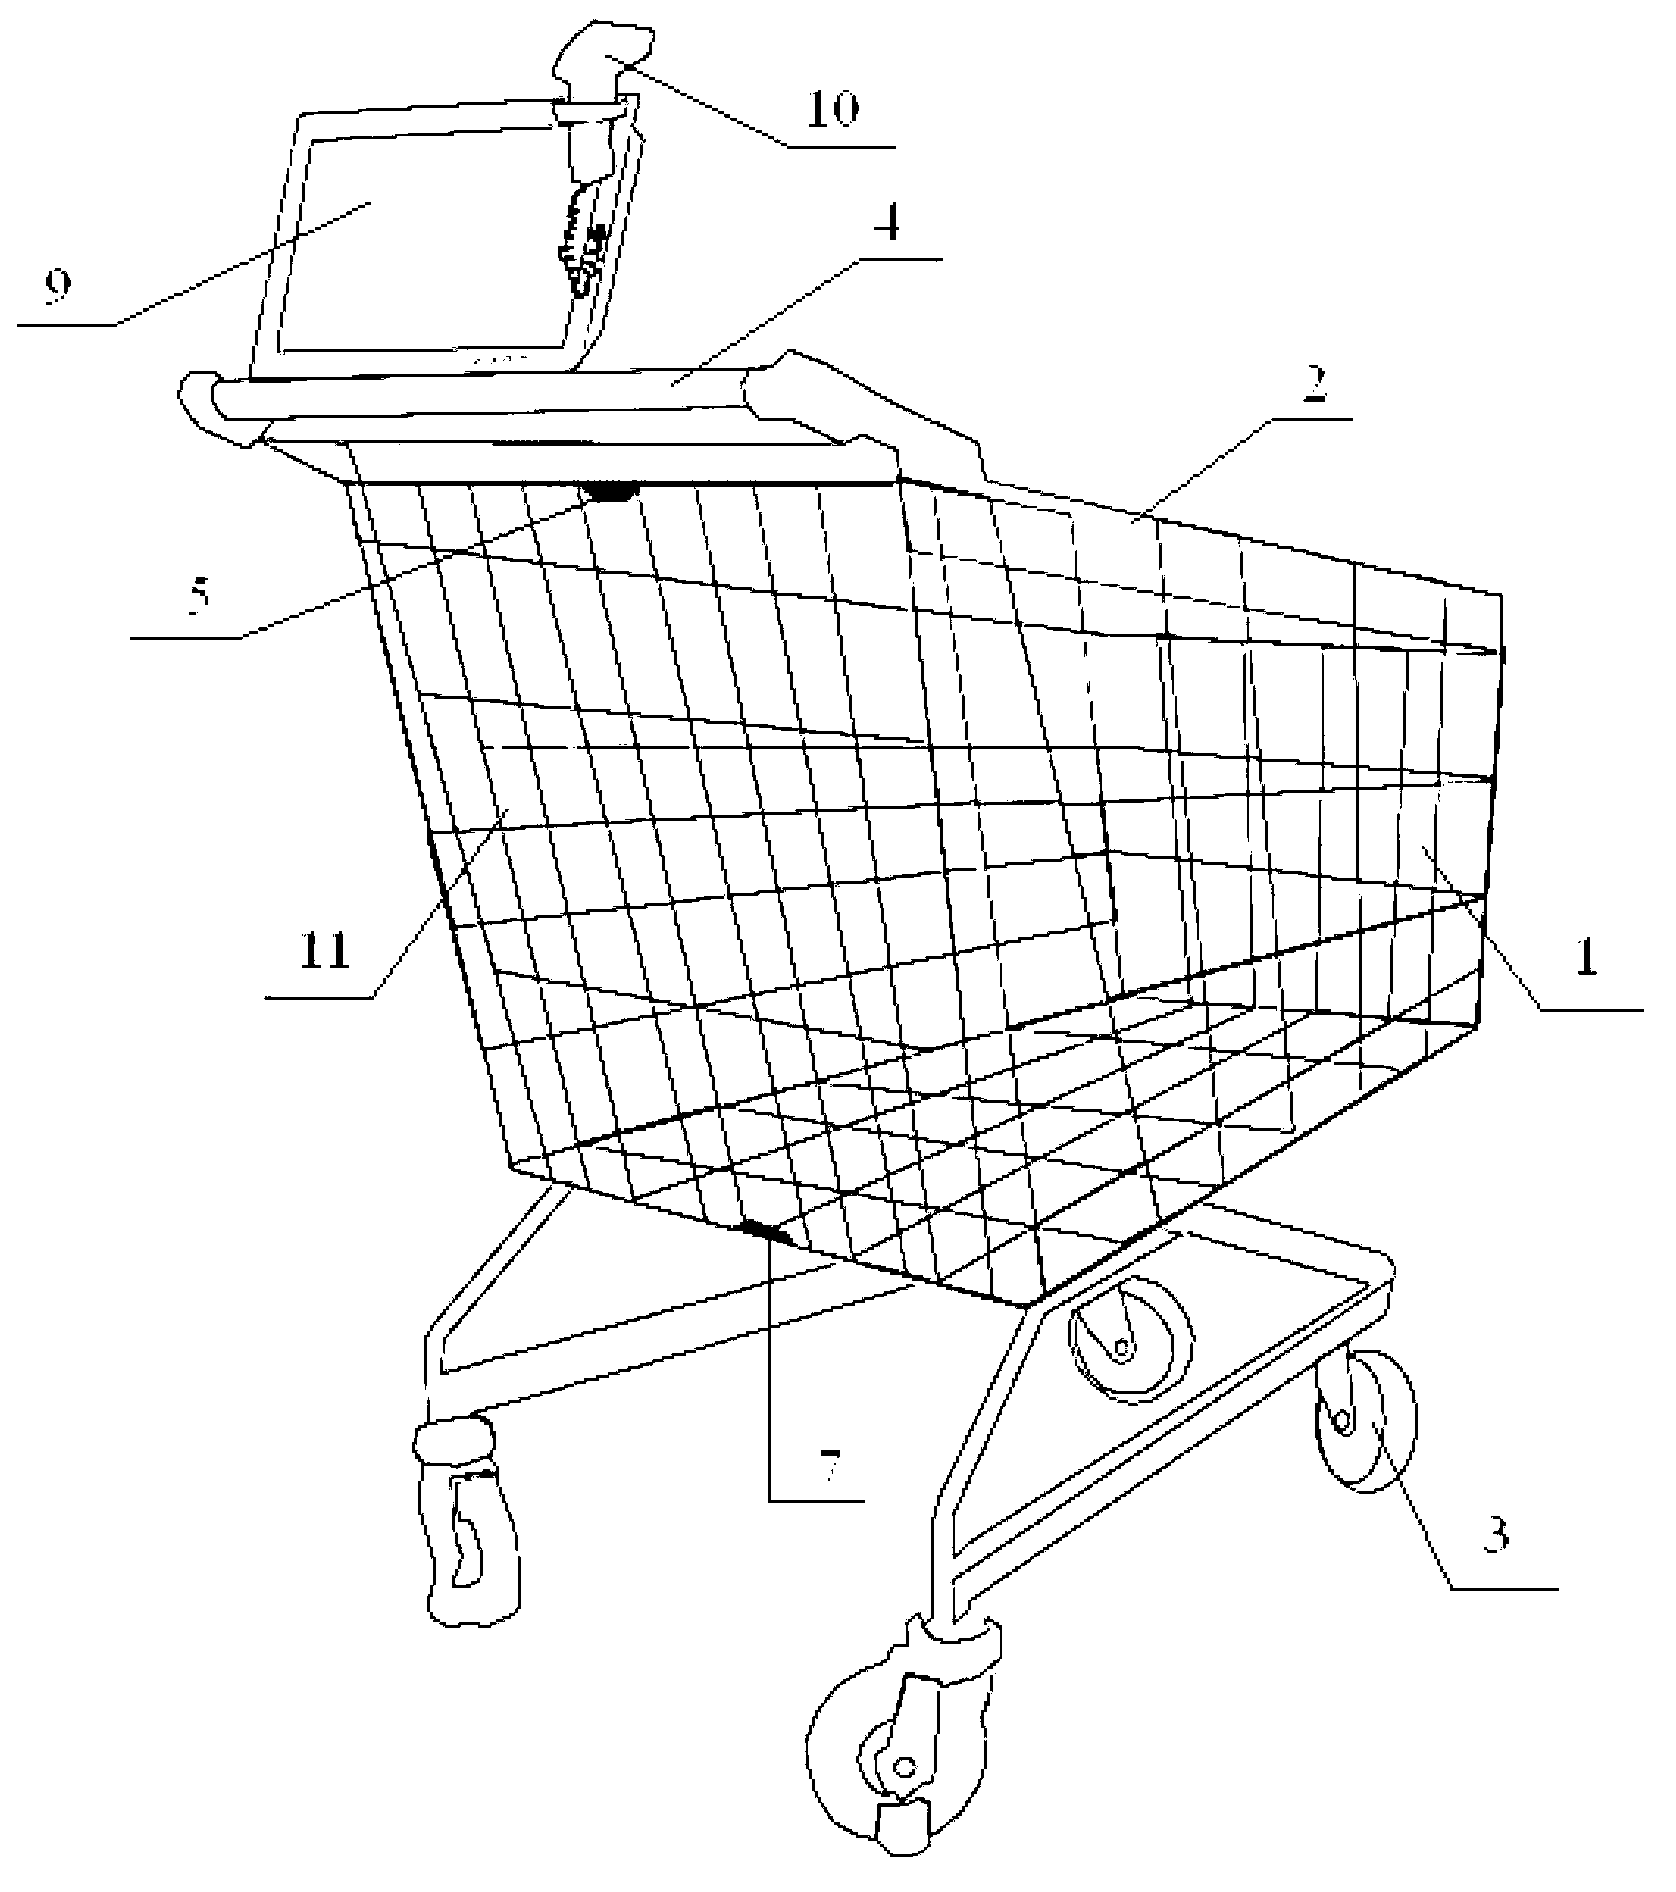 Novel self-help shopping checkout system and method for supermarkets